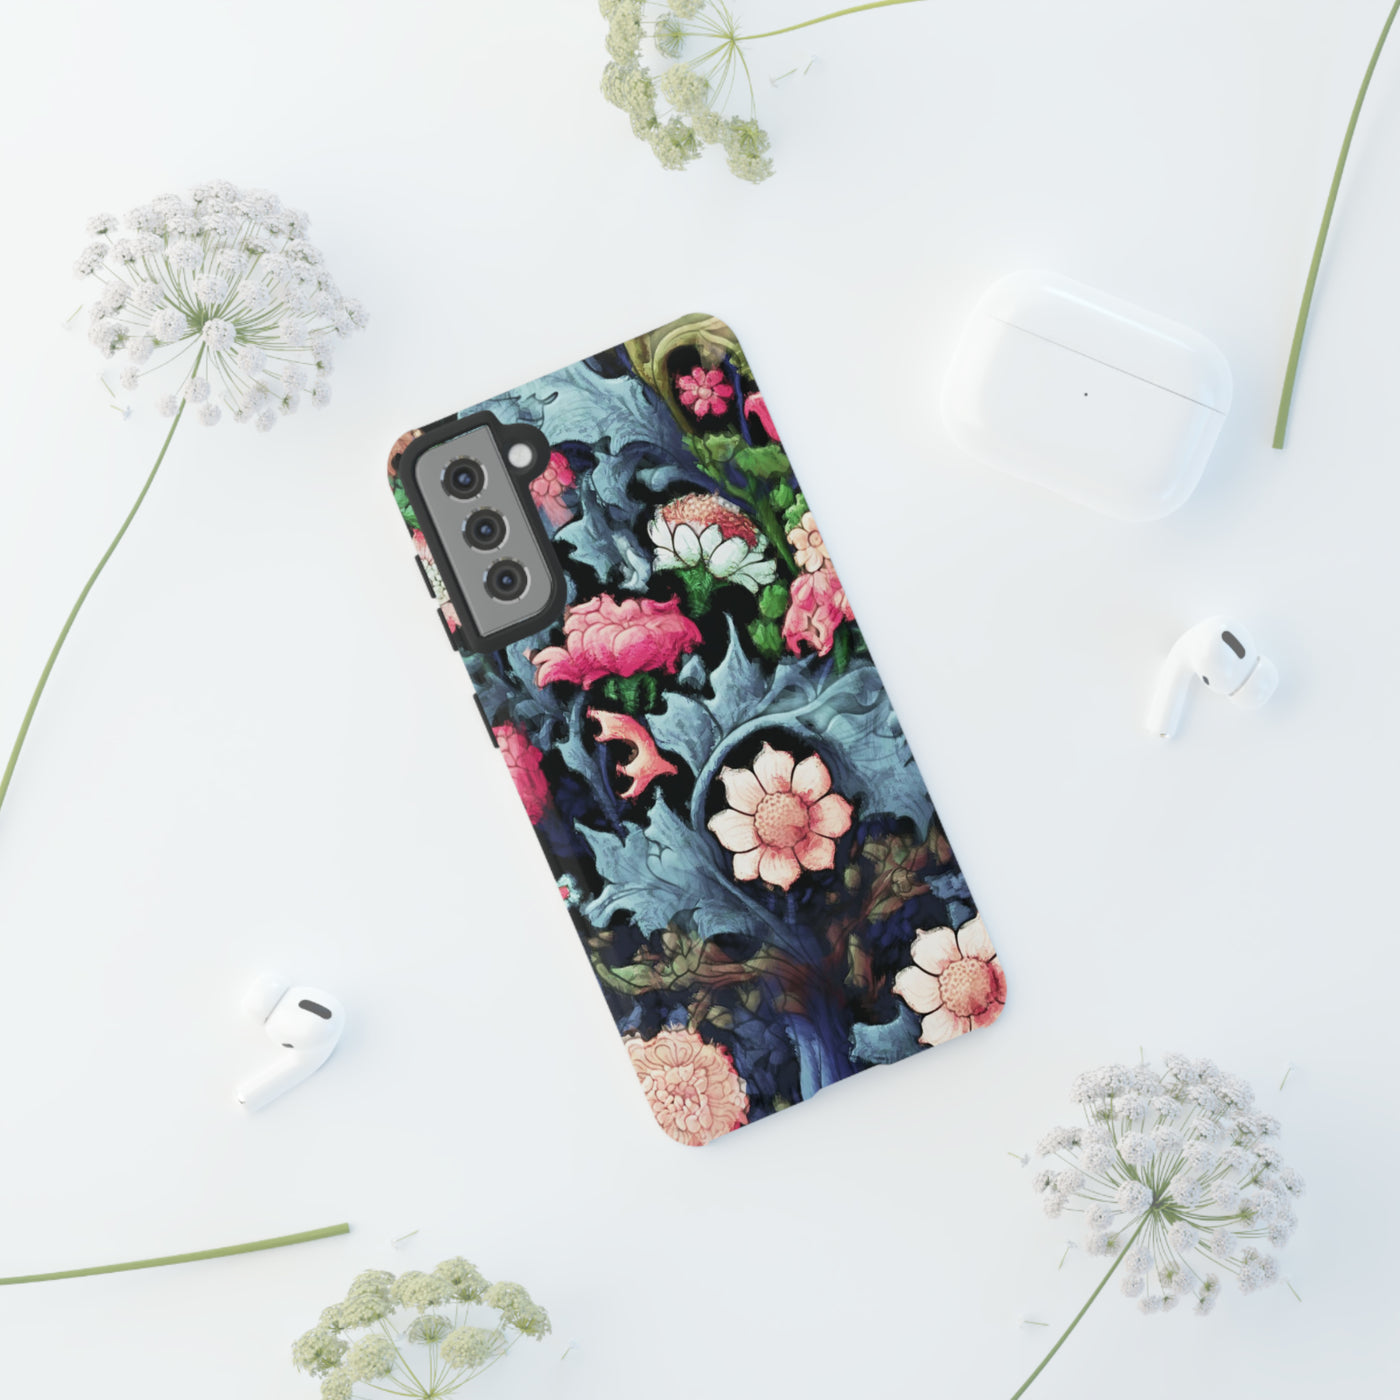 Cute Samsung Phone Case | Aesthetic Samsung Phone Case | Galaxy S23, S22, S21, S20 | Luxury Double Layer | Cool Flowers Design Floral